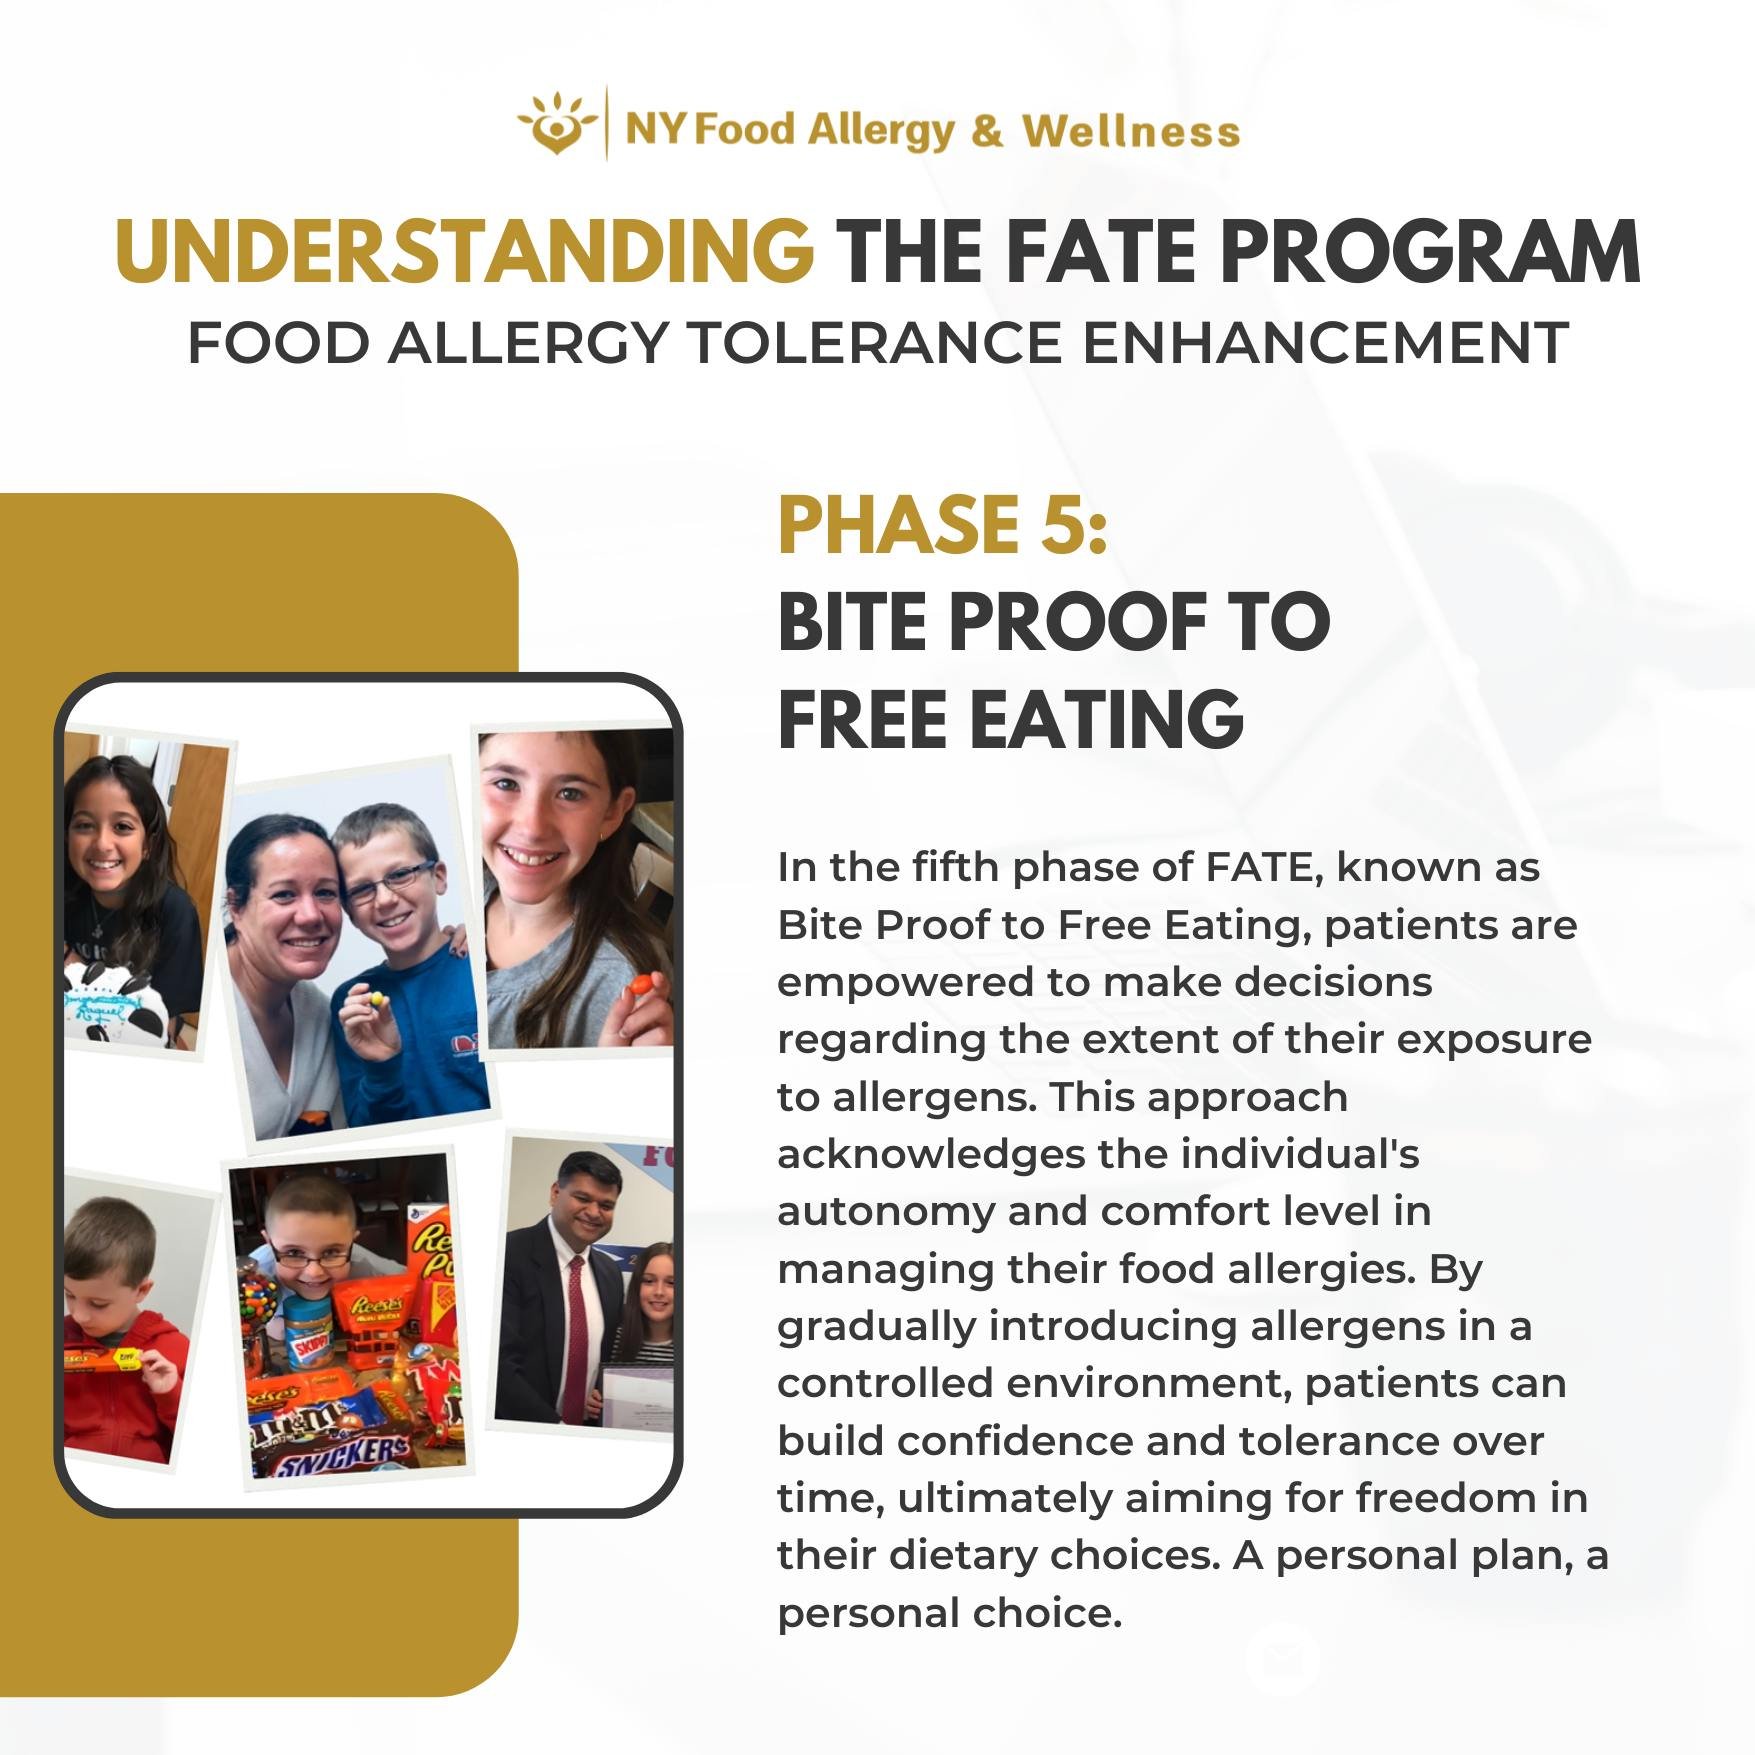 🌟Phase 5 of the FATE program: Bite Proof to Free Eating!  In this transformative phase, our patients gain the confidence to manage their food allergies with greater autonomy. At NY Food Allergy &amp; Wellness, we're here to support every step toward